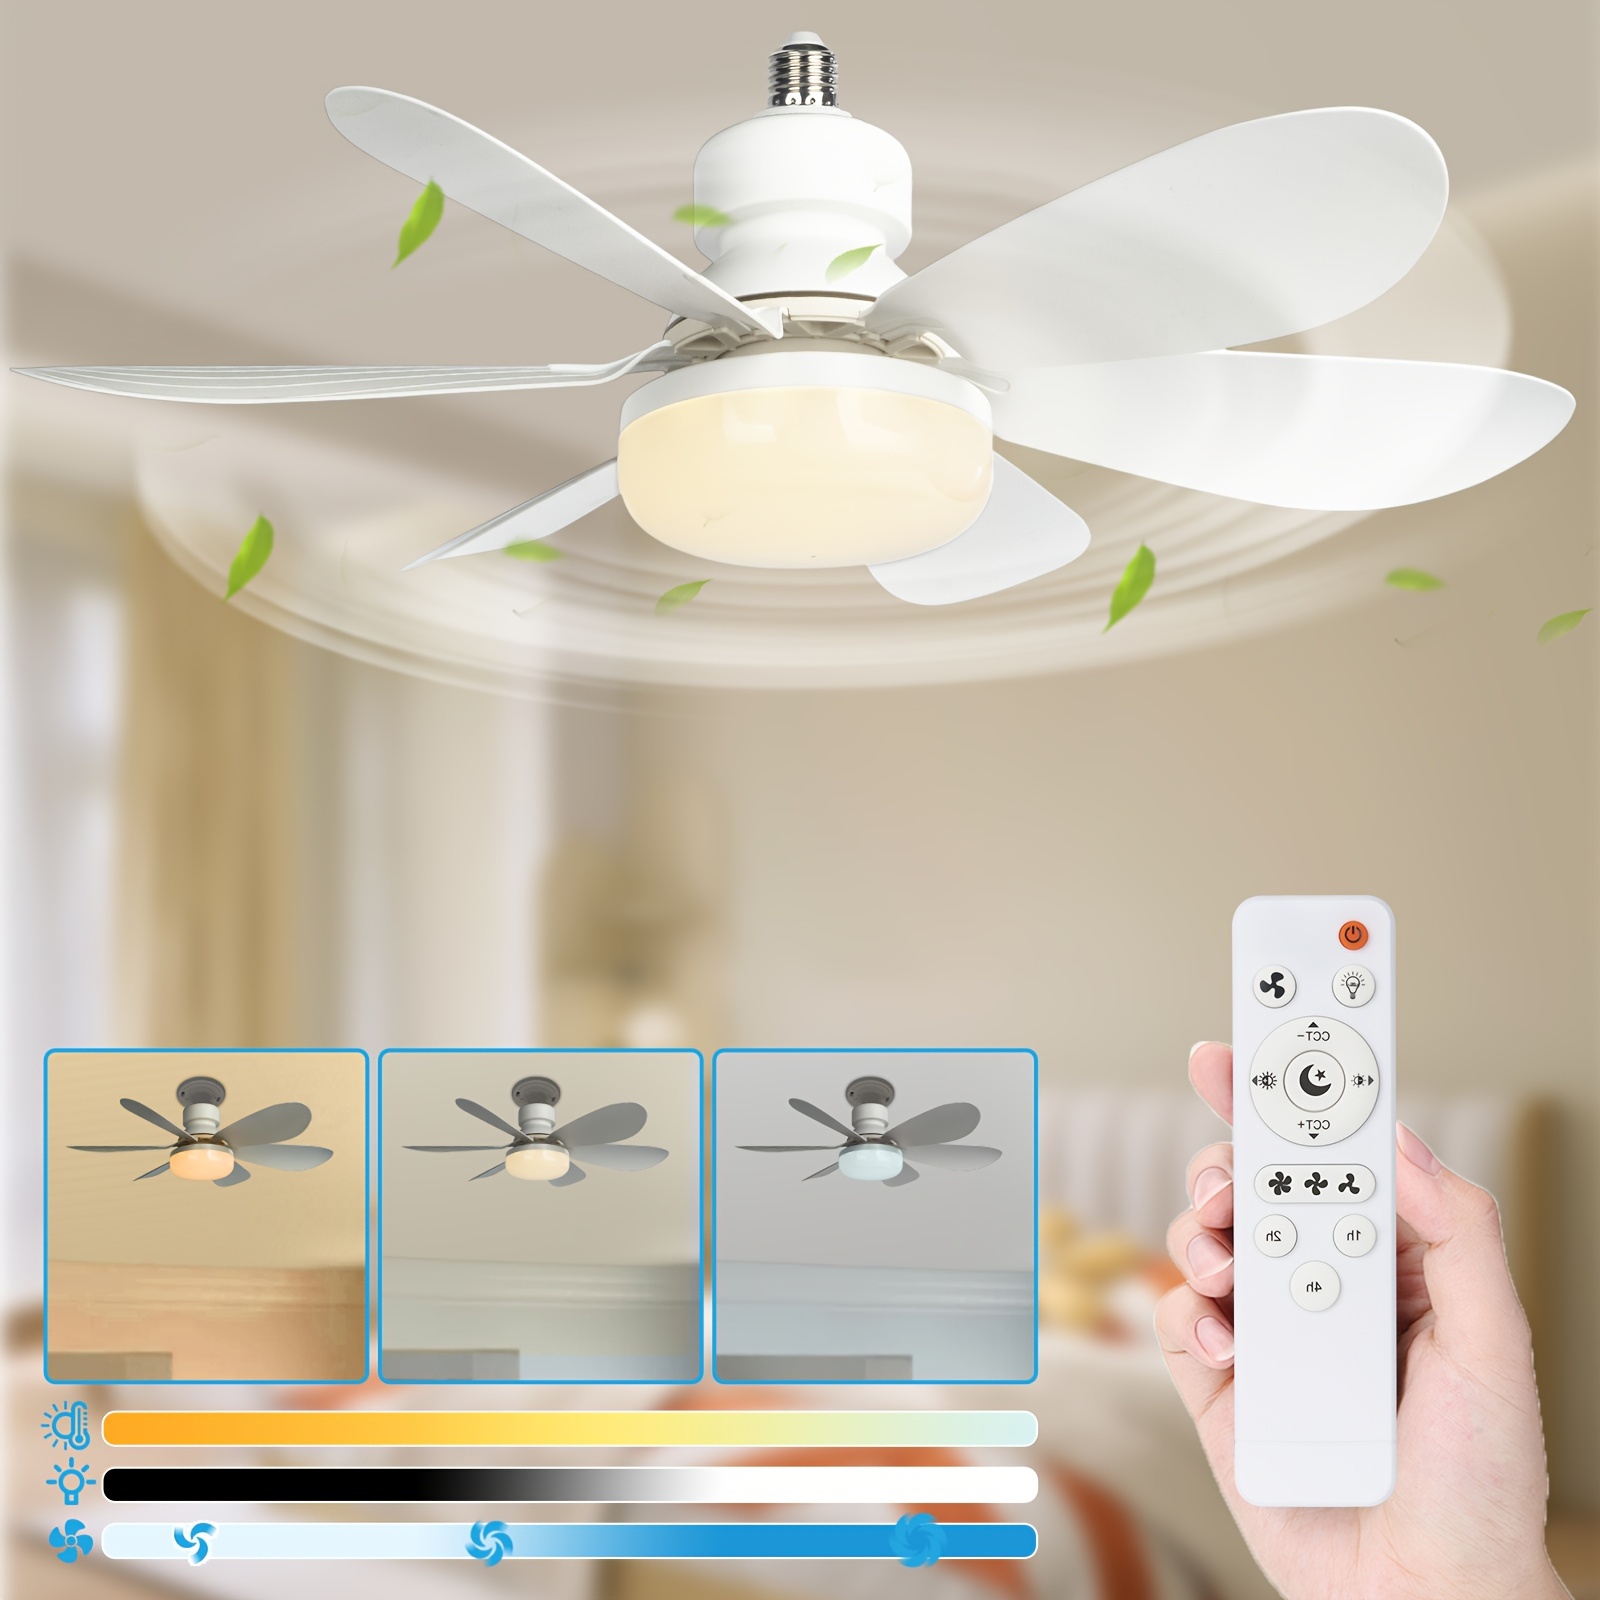 

1 Pc E27/e26 Screw-in Fan Light With Light & Remote, Stepless Dimming, 3-speed Wind Speed Adjustment, Suitable For Bedrooms, Living Rooms, Study Rooms, Kitchens, Toilets - No Wiring Needed!